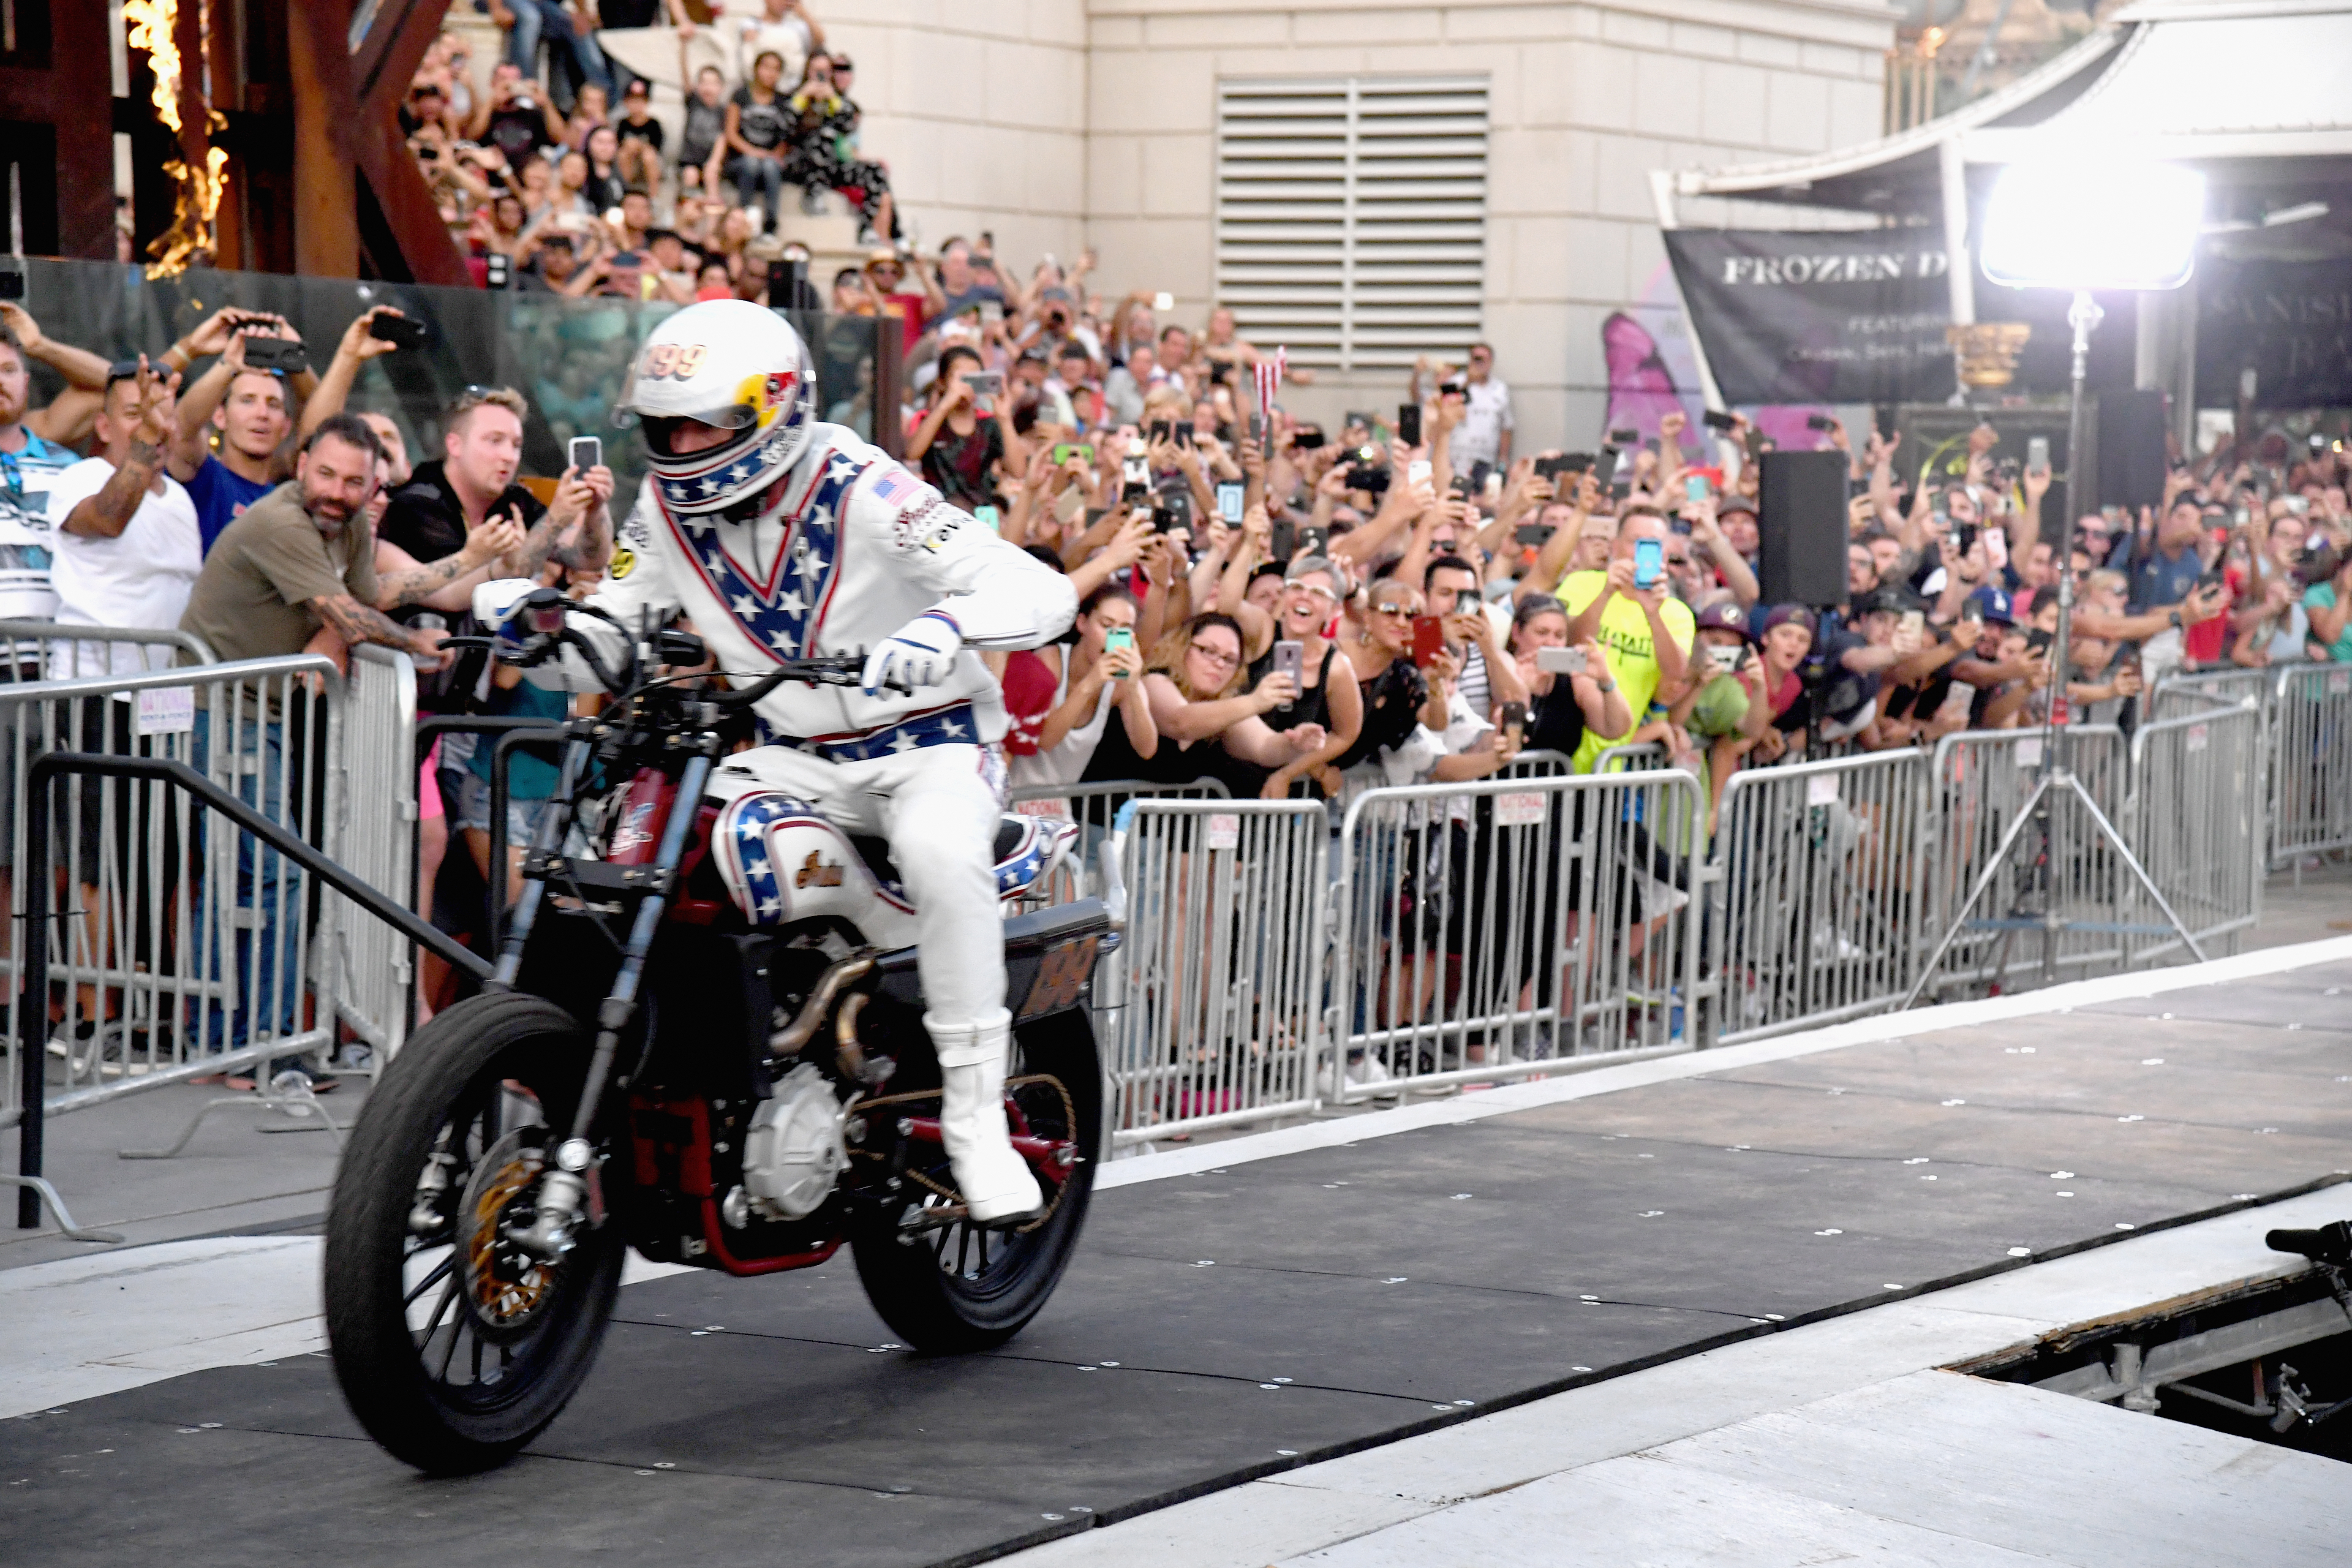 LAS VEGAS, NV - JULY 08:  Travis Pastrana peforms during HISTORY's Live Event "Evel Live" on July 8, 2018 in Las Vegas, Nevada.  (Photo by Ethan Miller/Getty Images for HISTORY)